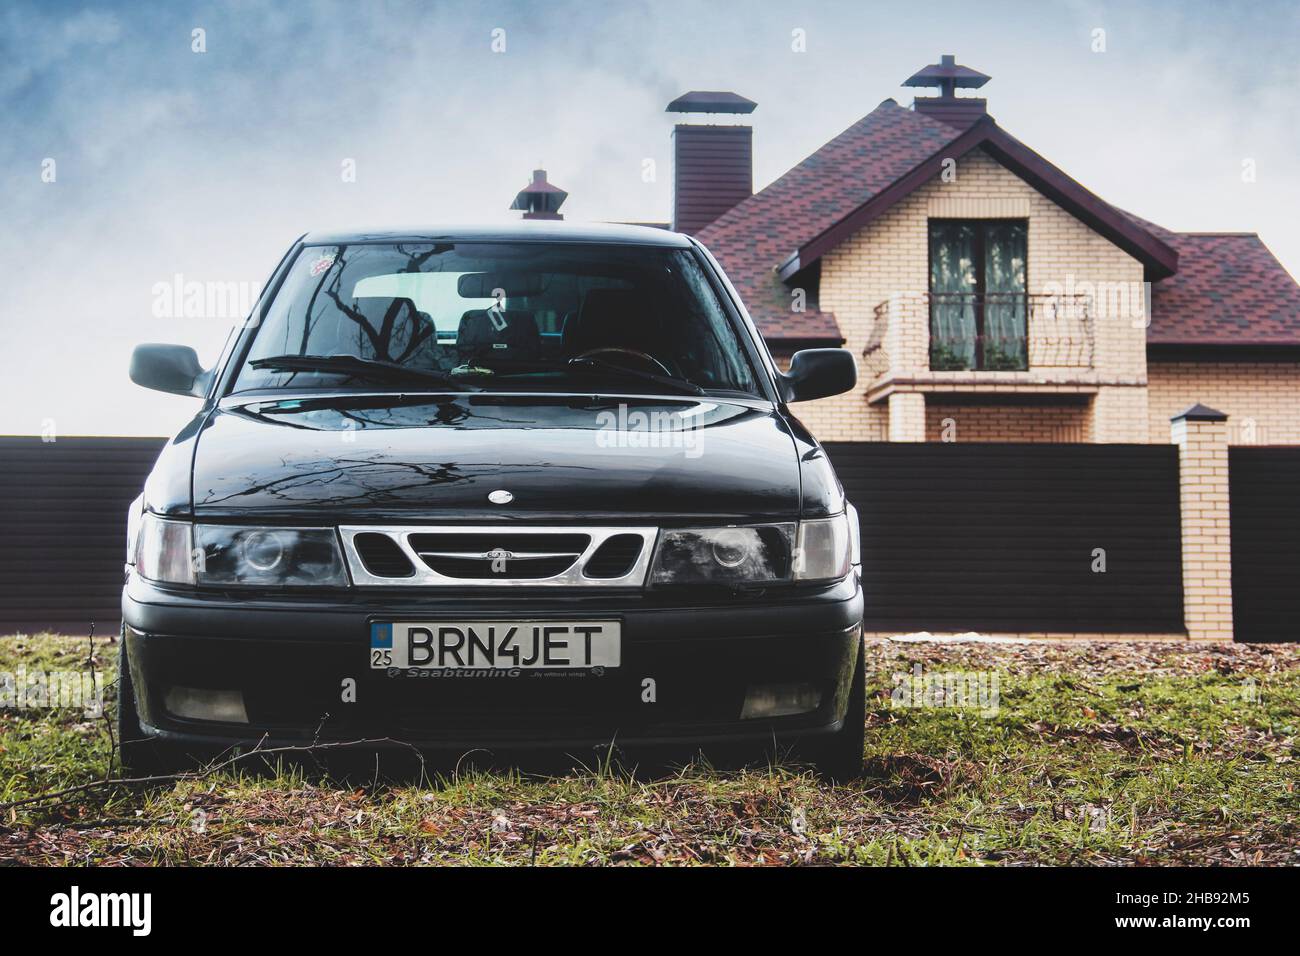 Chernihiv, Ukraine - March 20, 2021: Old Swedish car Saab 900 Turbo on the background of the house Stock Photo